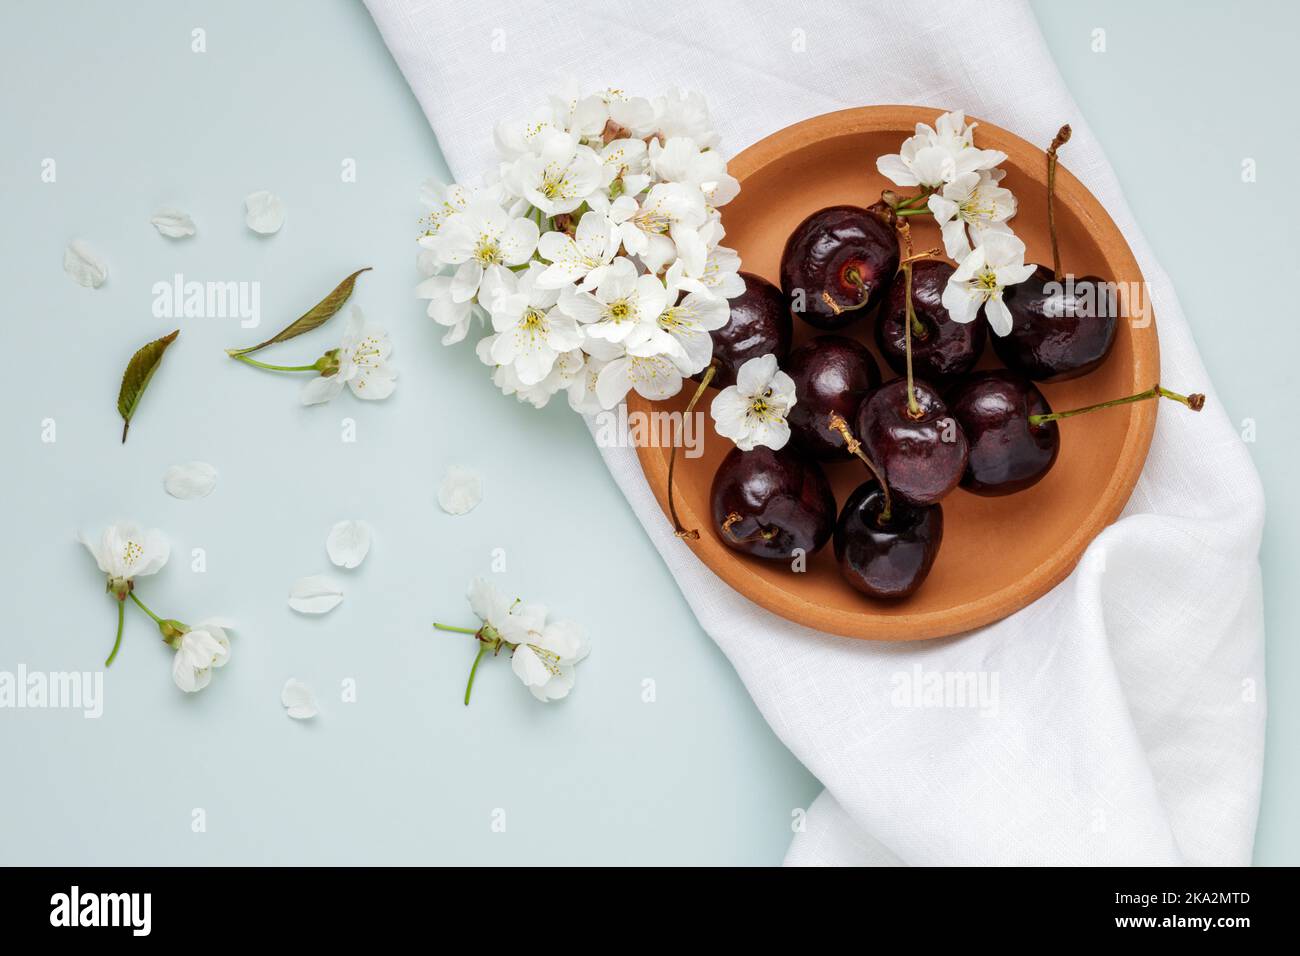 Cherry blossom and imperfect cherries Stock Photo